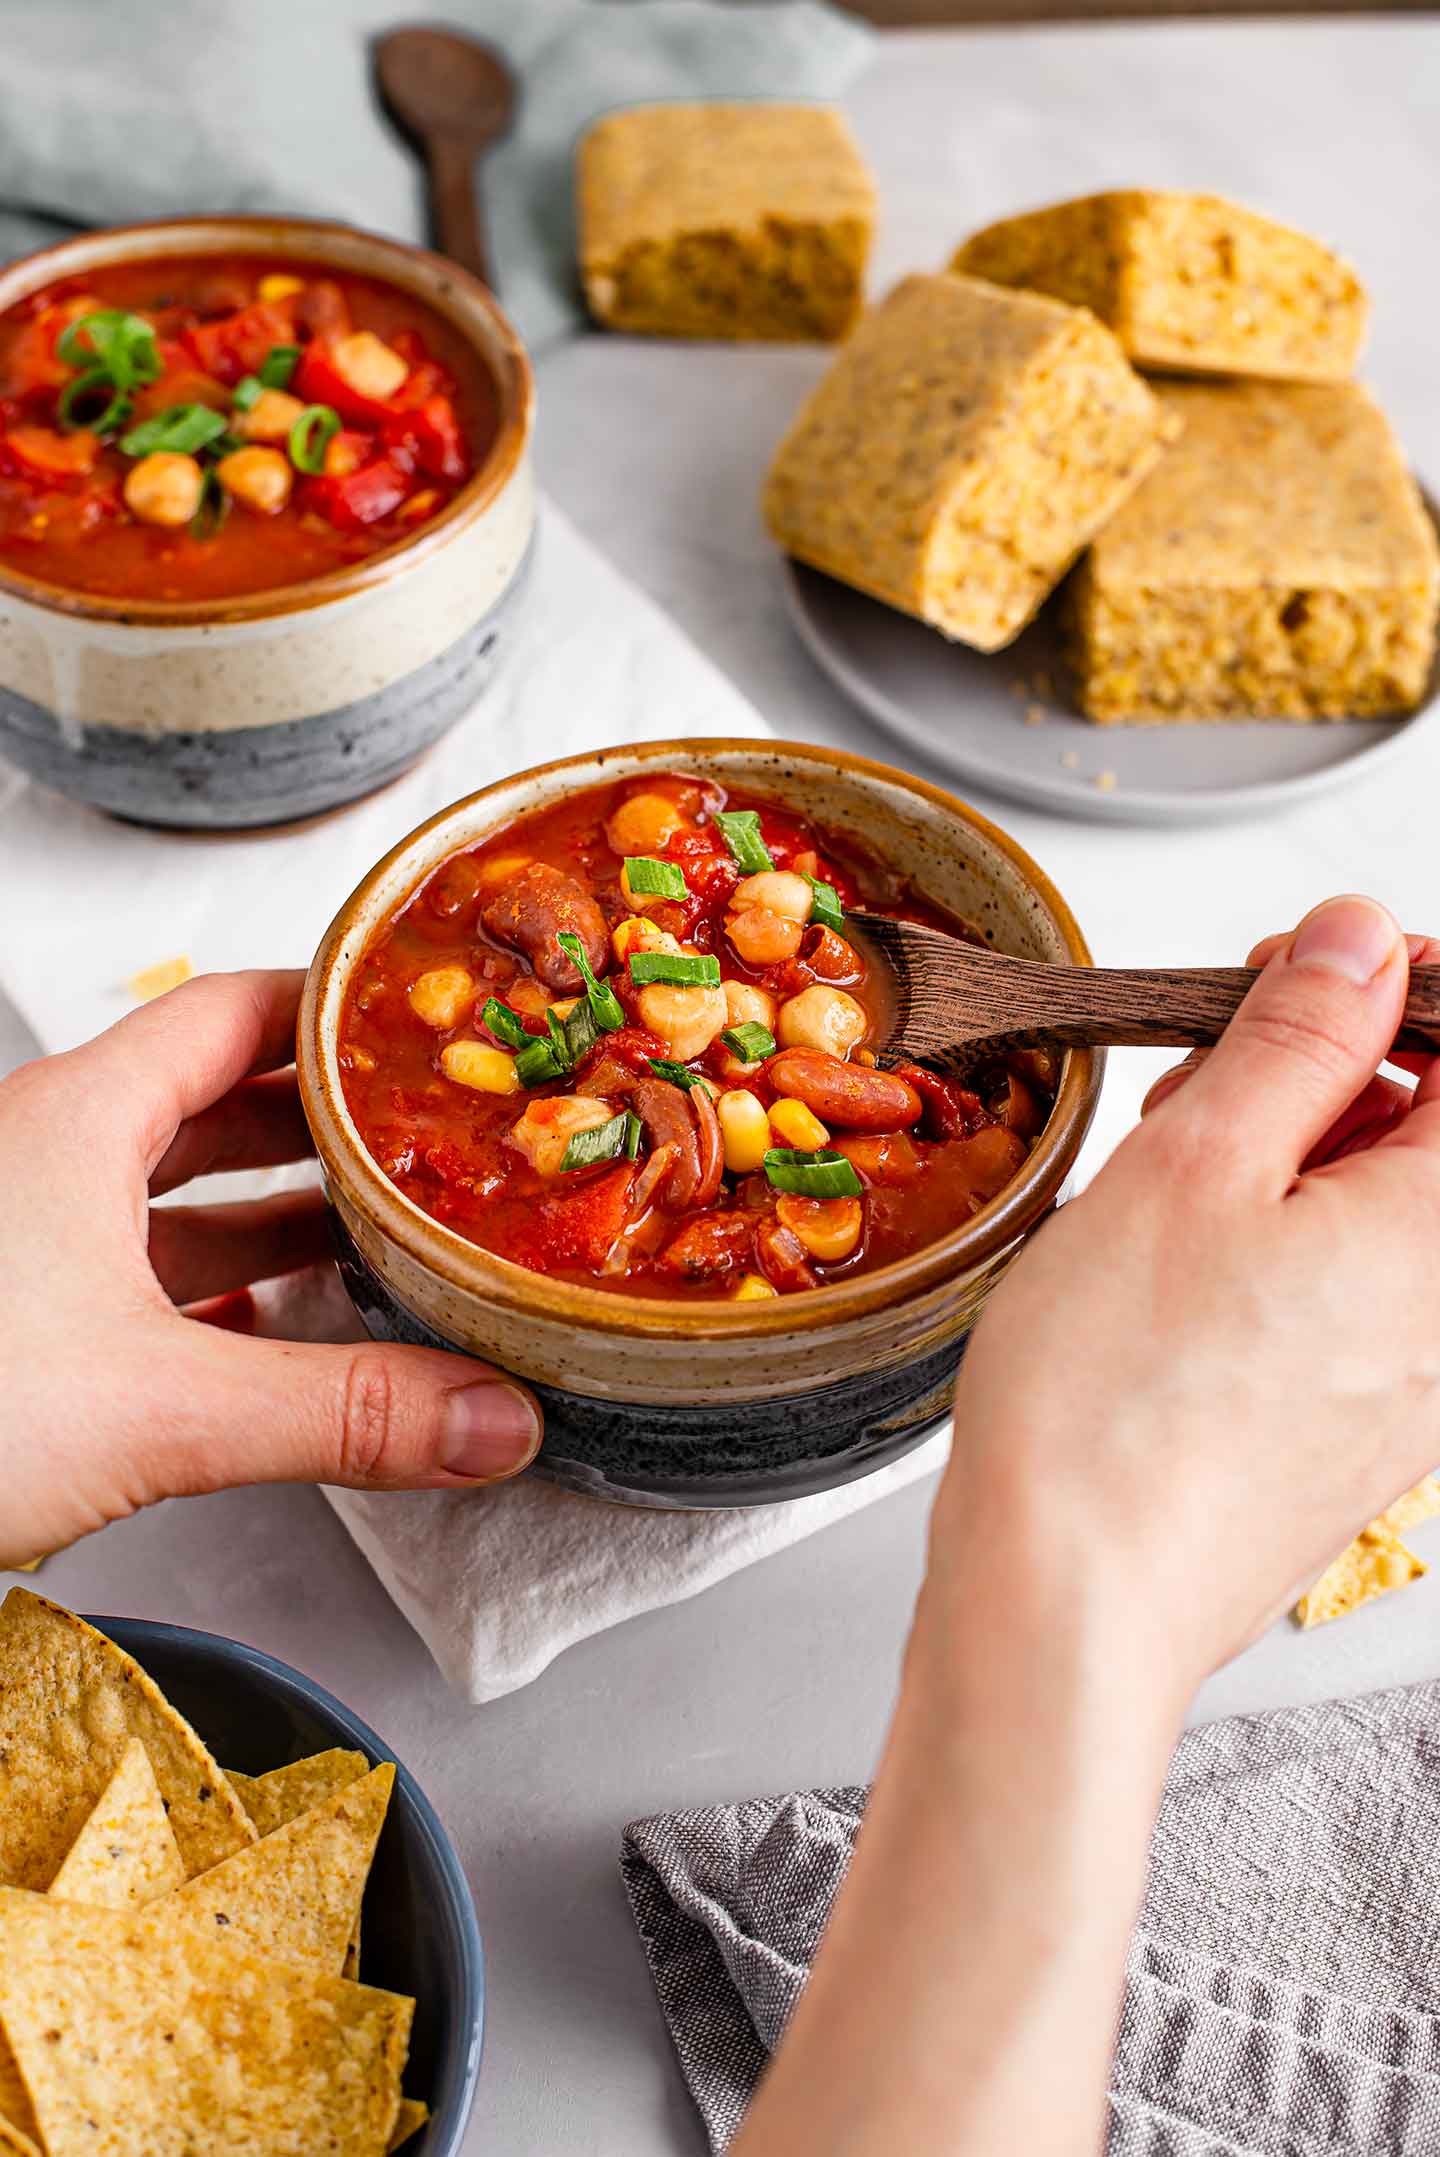 Side view of a hand using a wooden spoon to scoop easy chipotle chilli from a full, comforting bowl. Cornbread, corn chips, and another bowl of chilli are in the background.